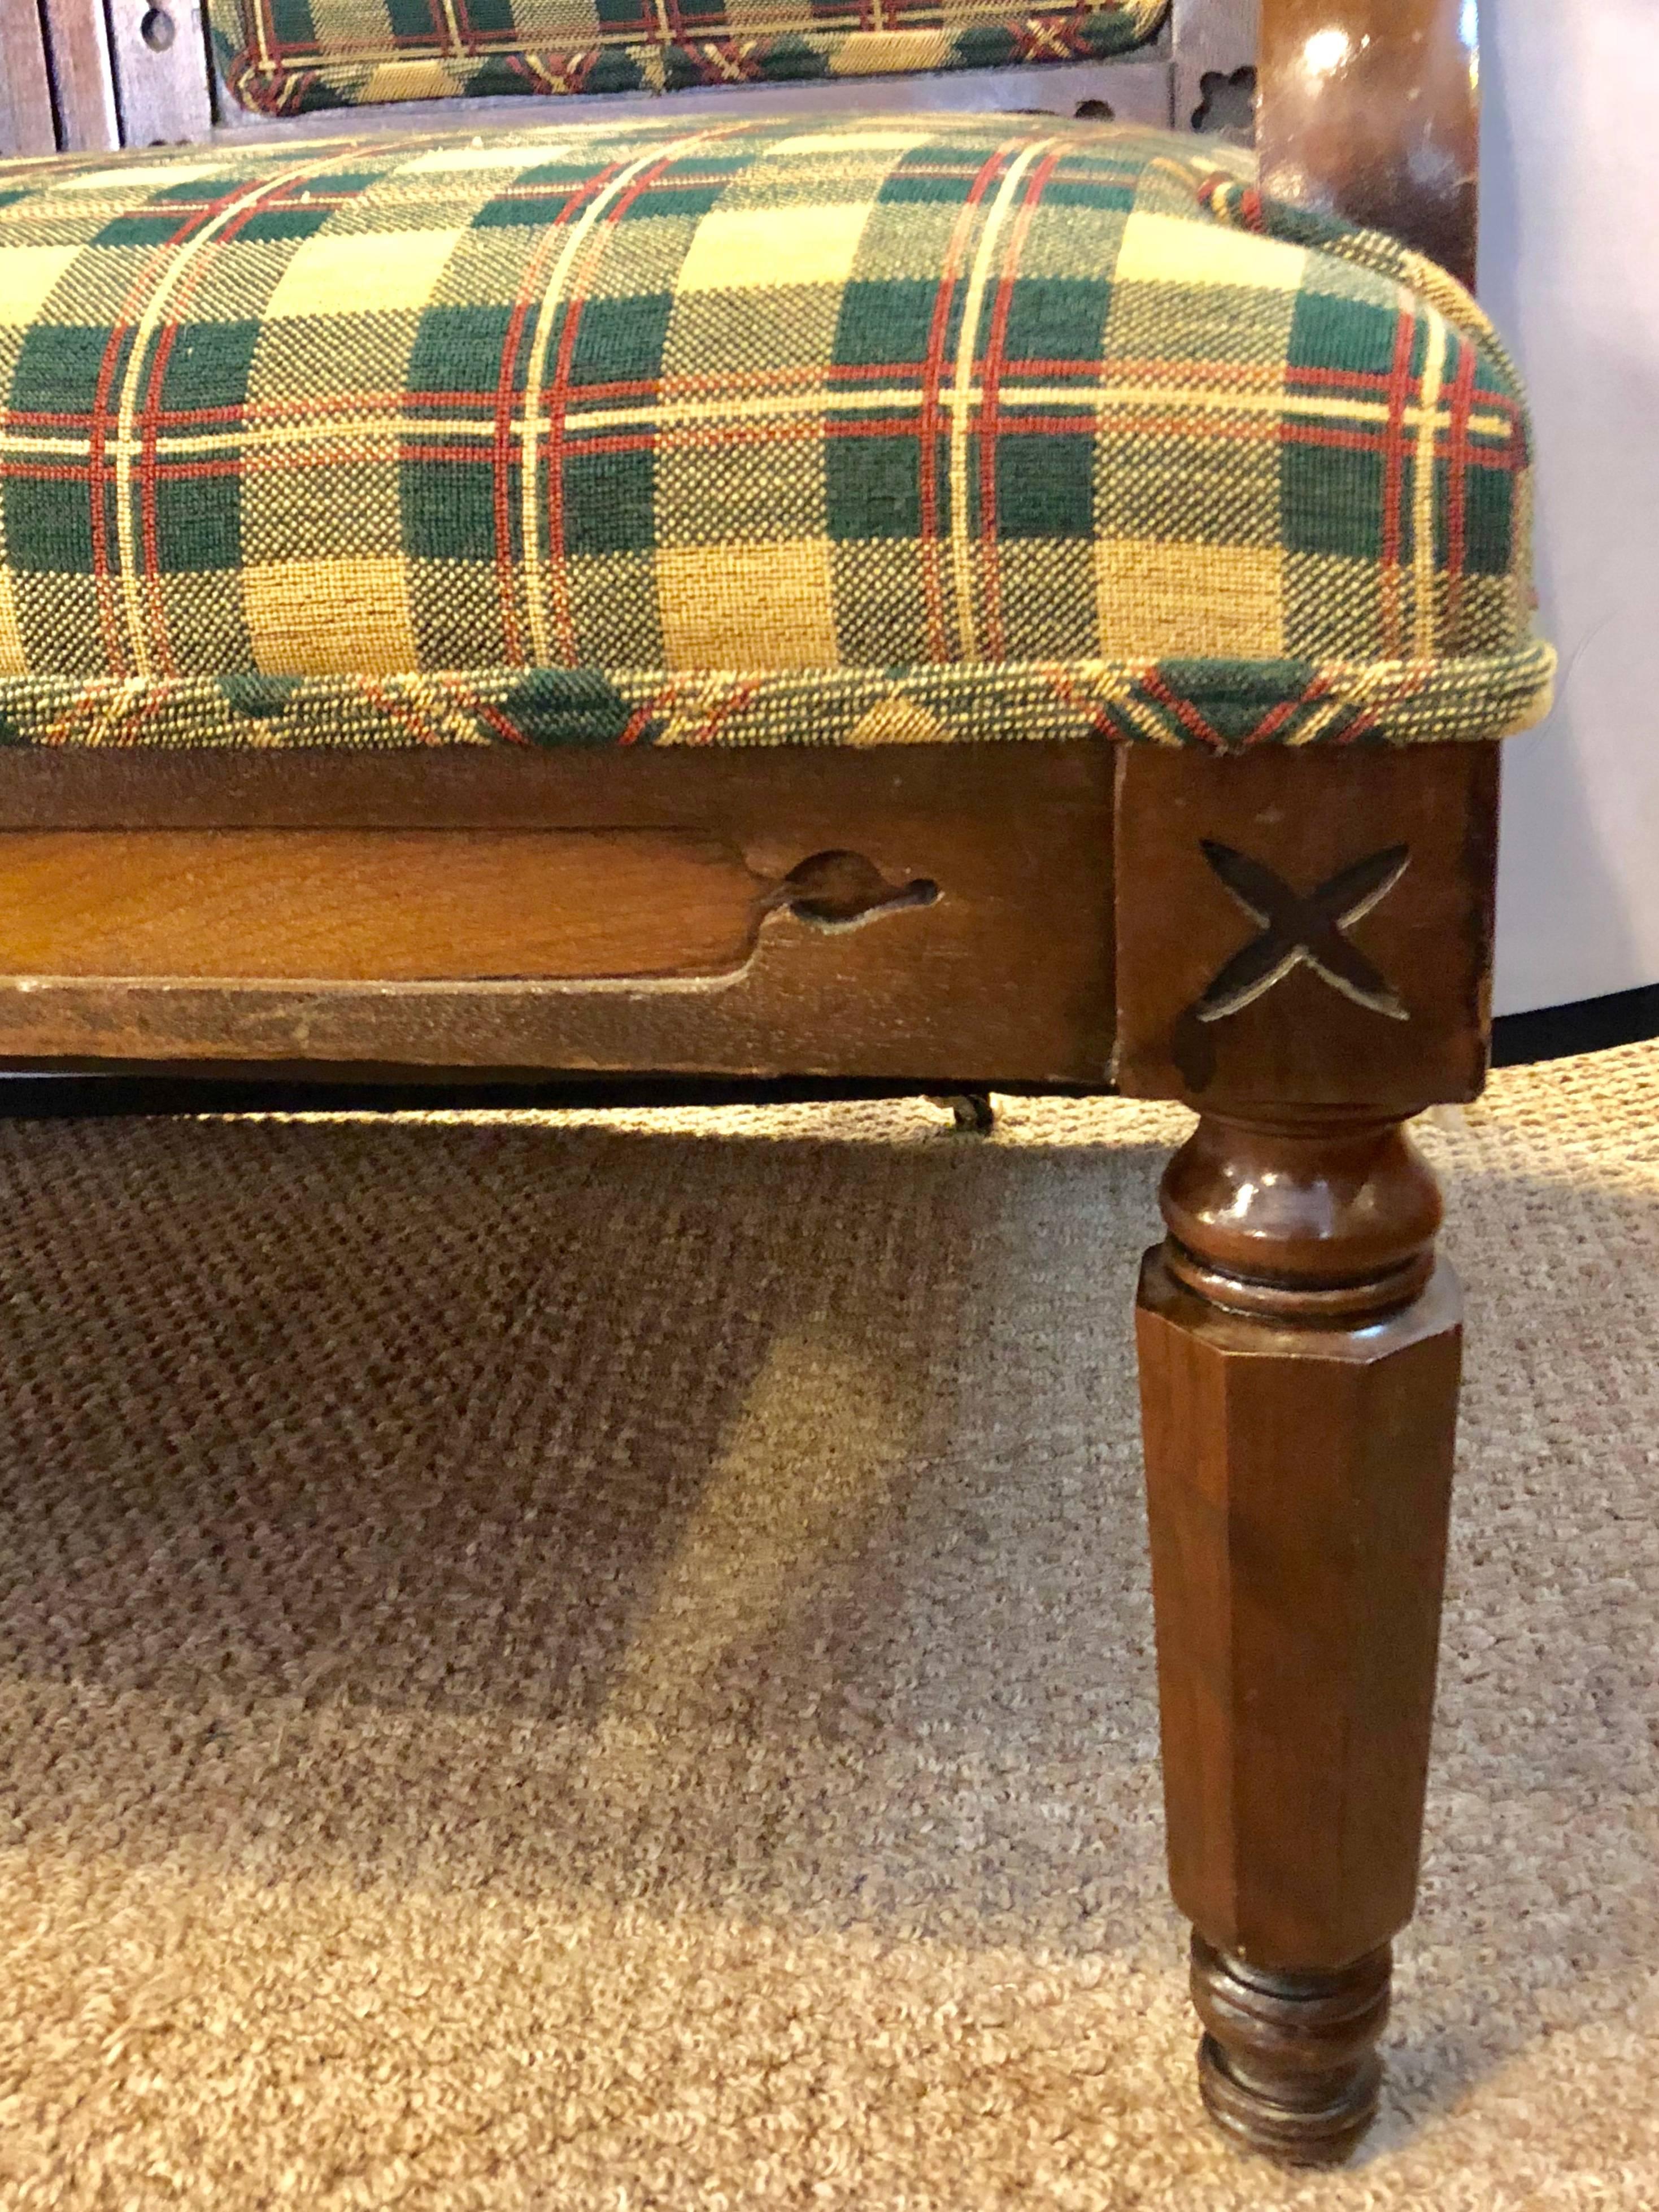 A Gothic 19th century sofa in an Irish plaid upholstery. Large and impressive is this finely crafted Gothic hall bench or sofa.